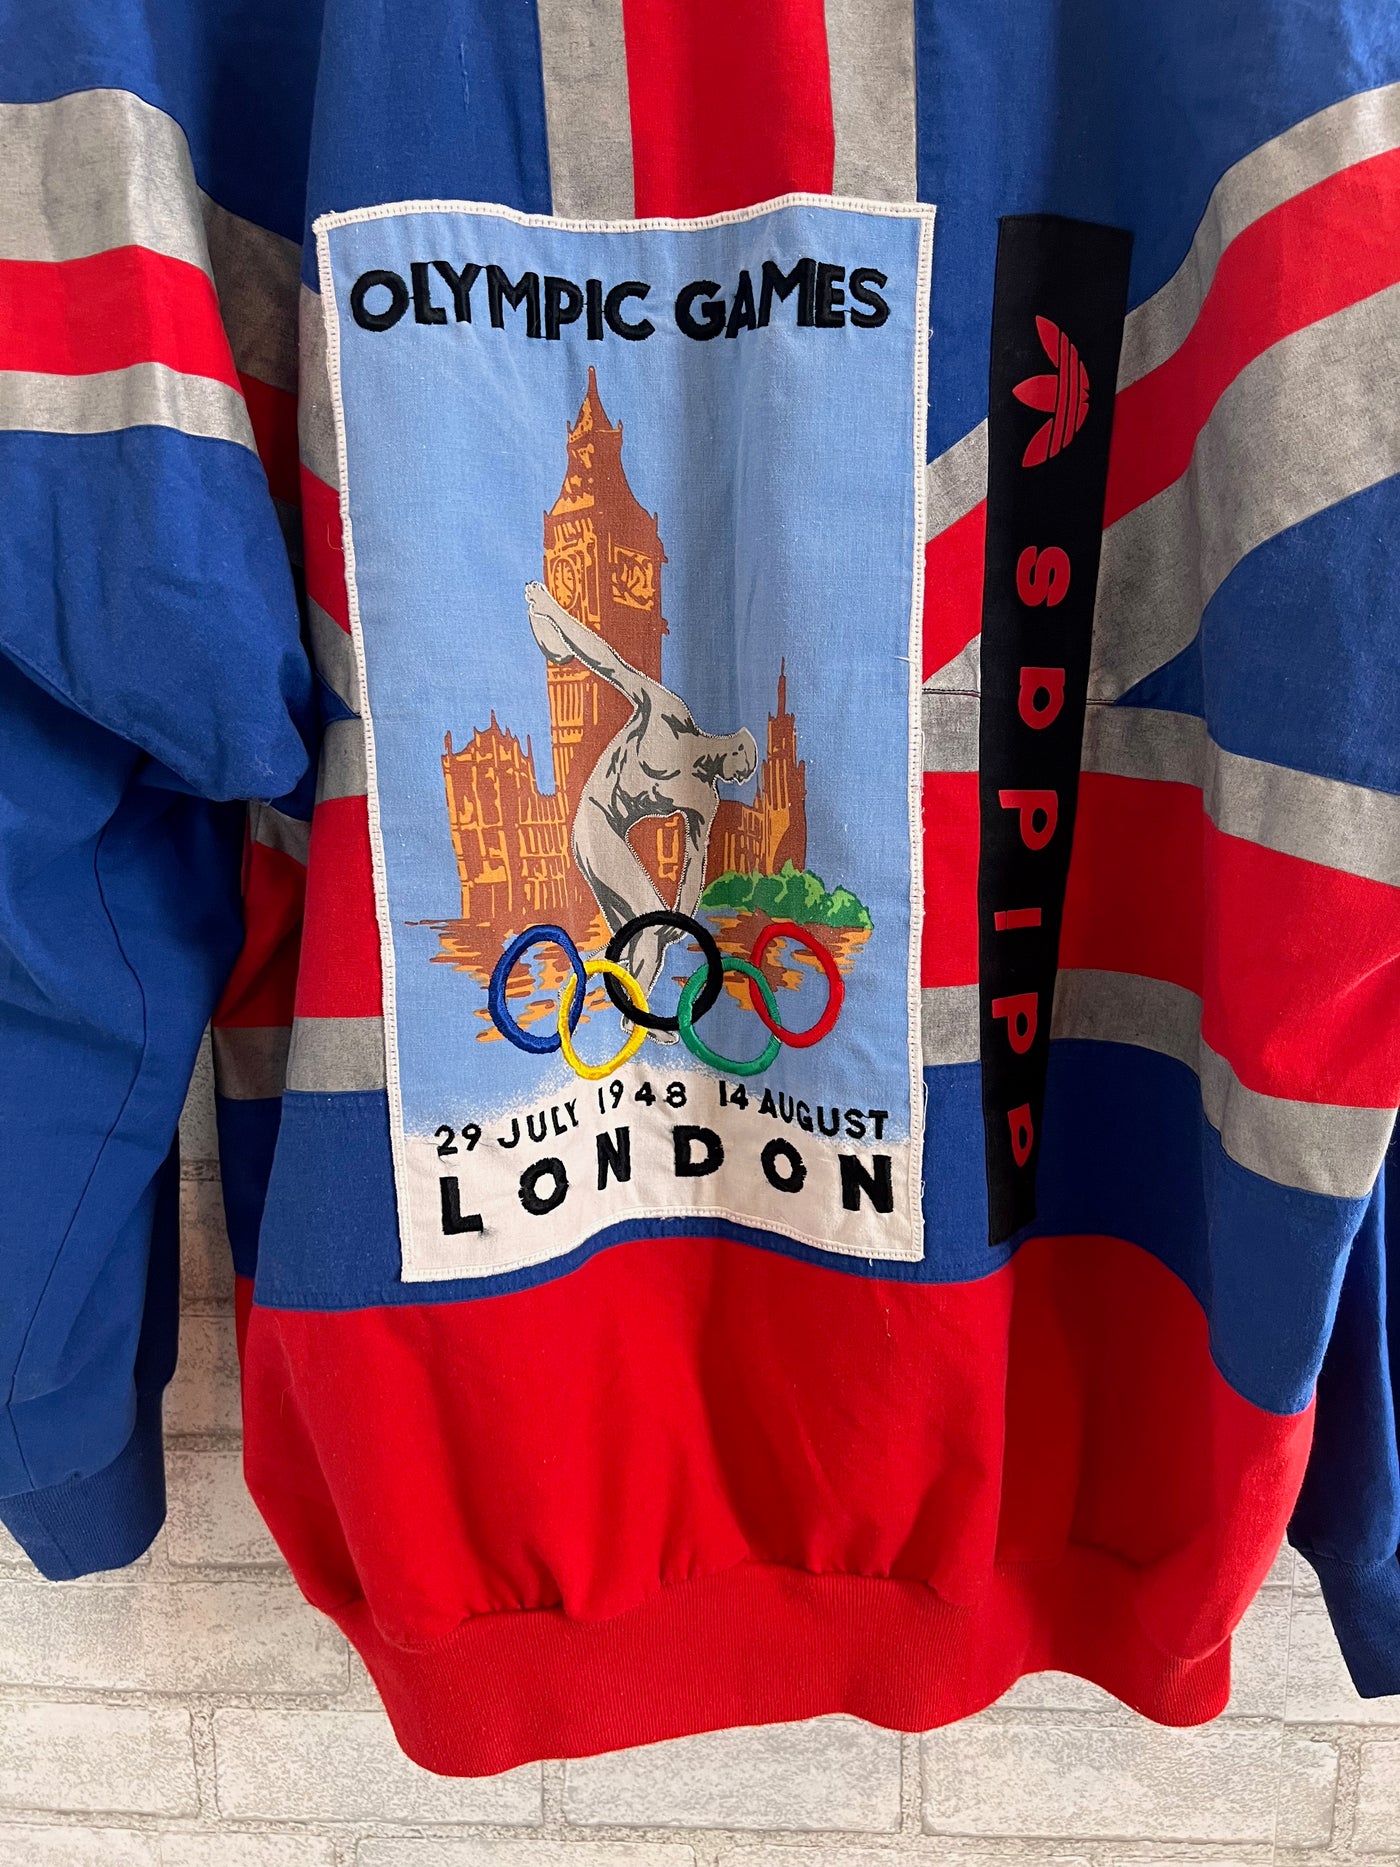 Rare Vintage 80s Adidas 1908 1948 London Olympics Men's Pullover sweatshirt. Blue and red. Large